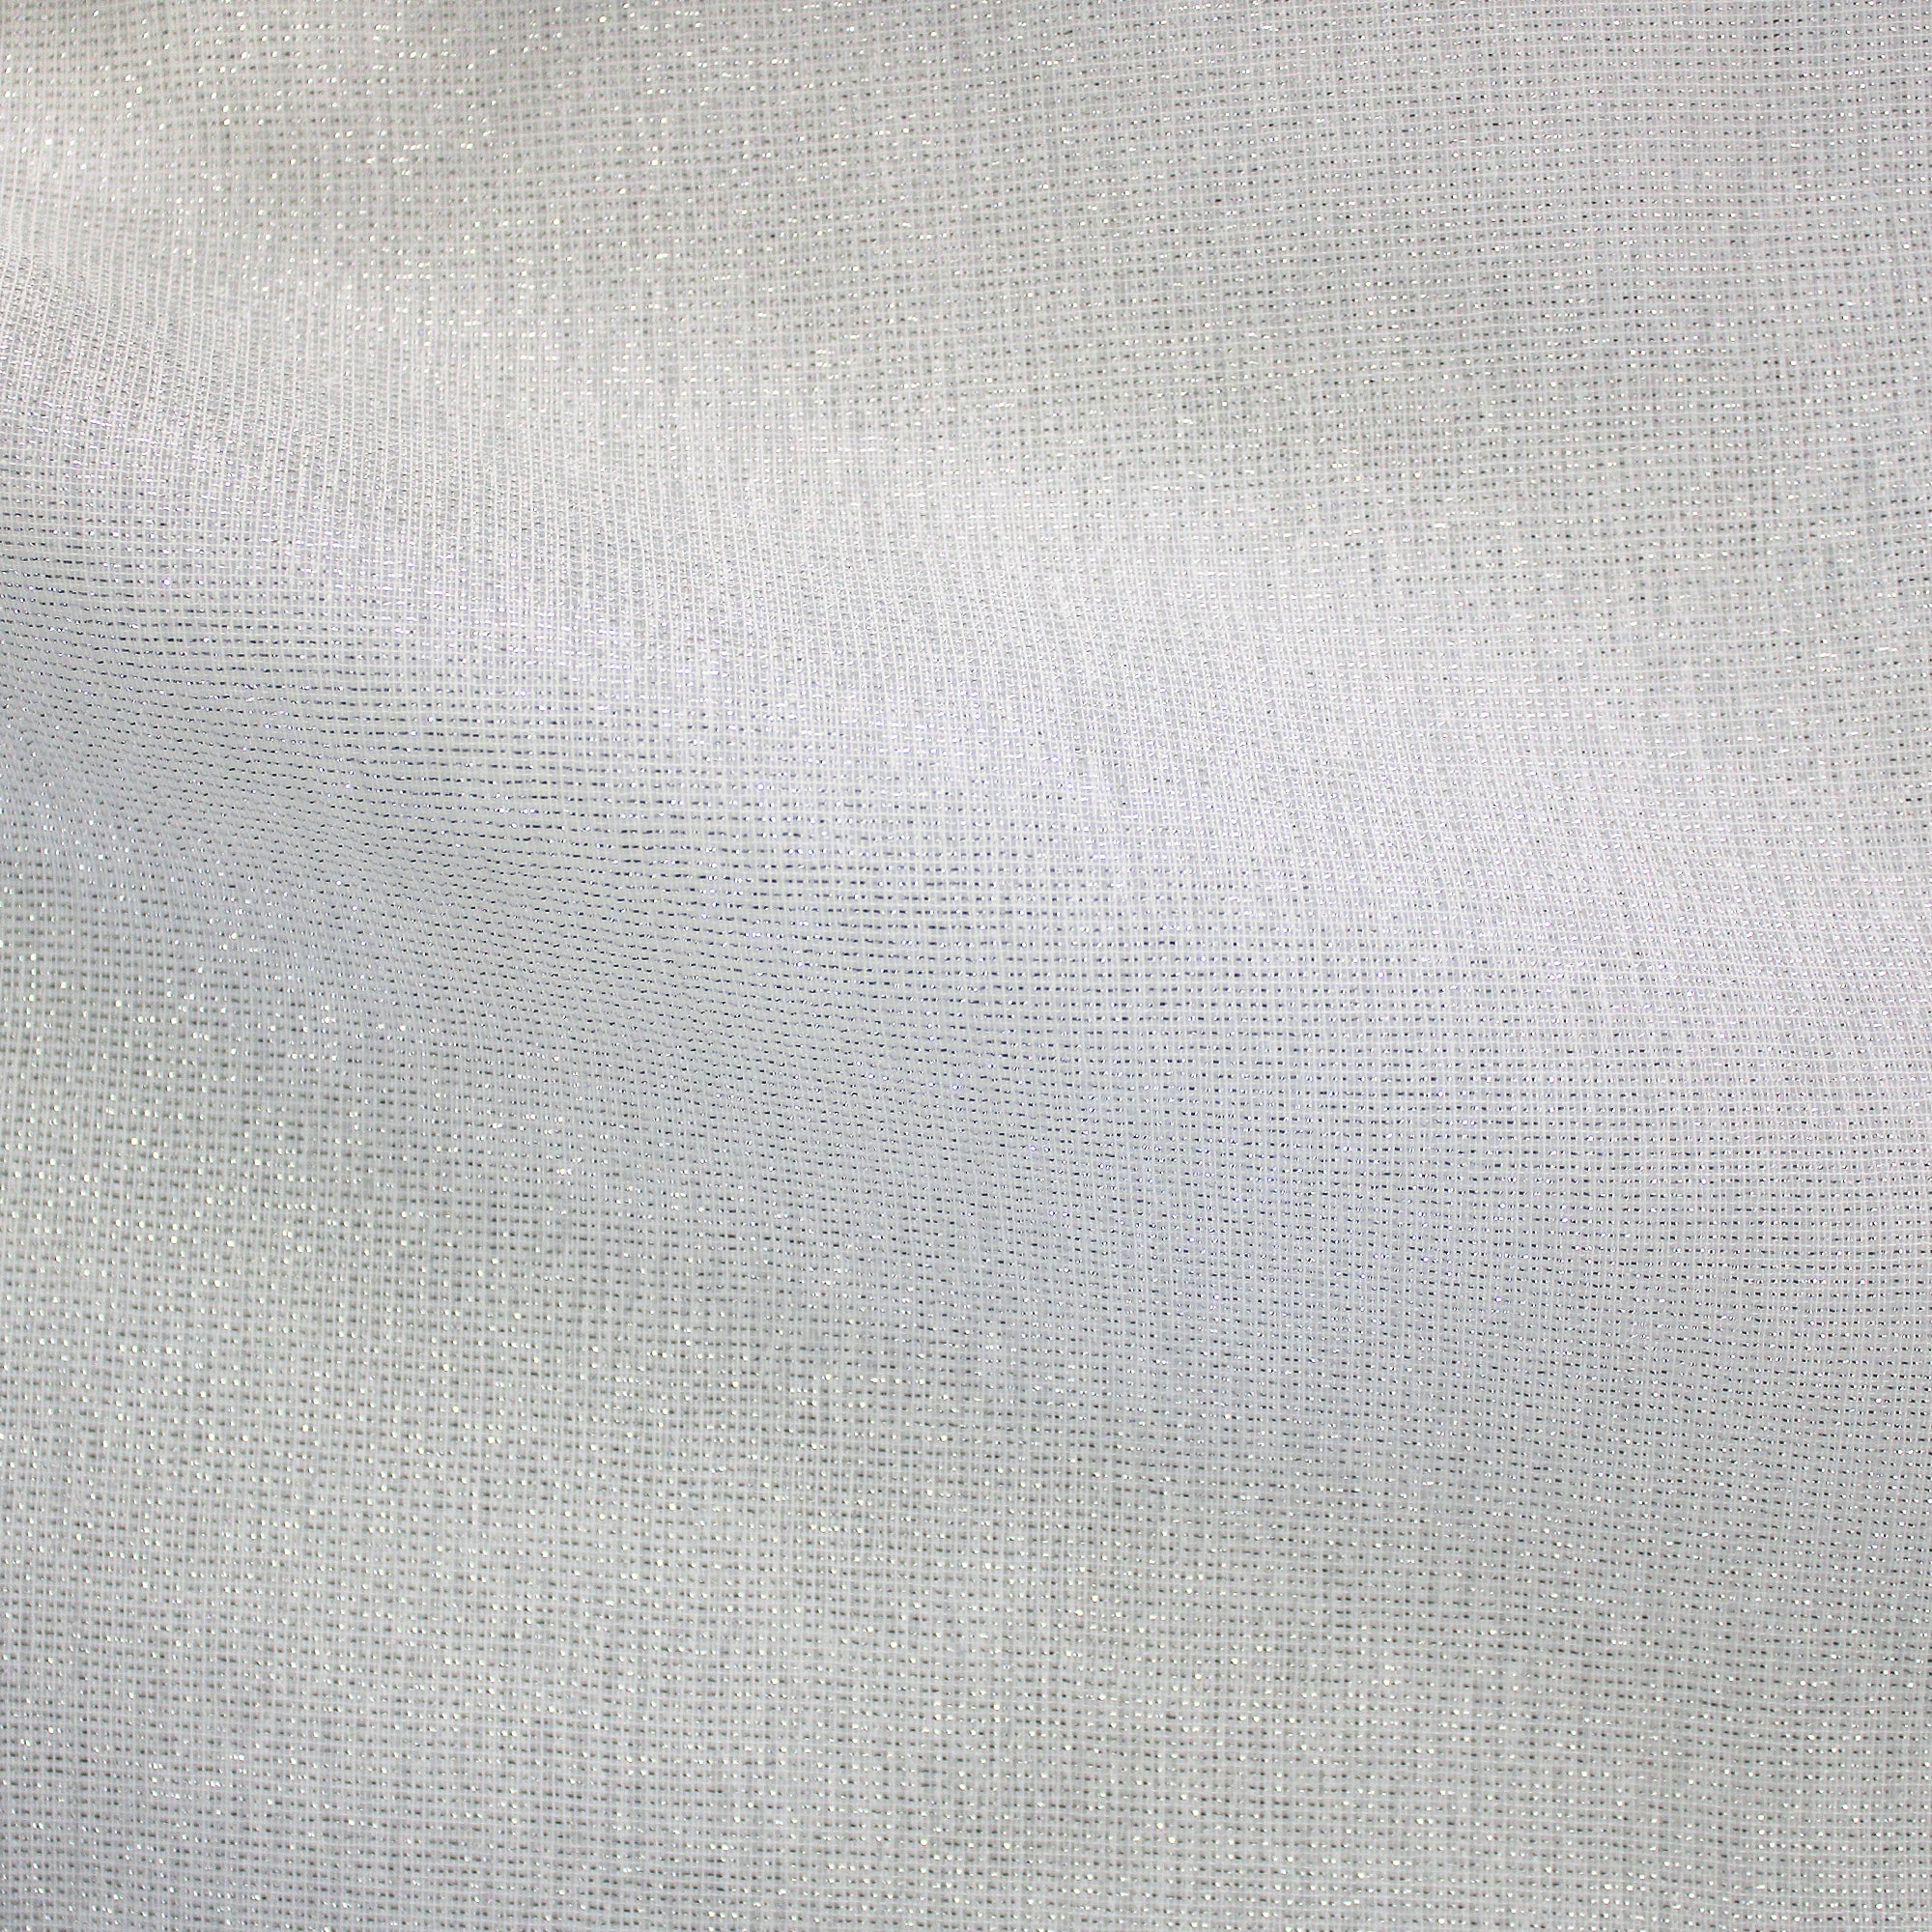 Everly Fabric | Solid Sheer Fabric